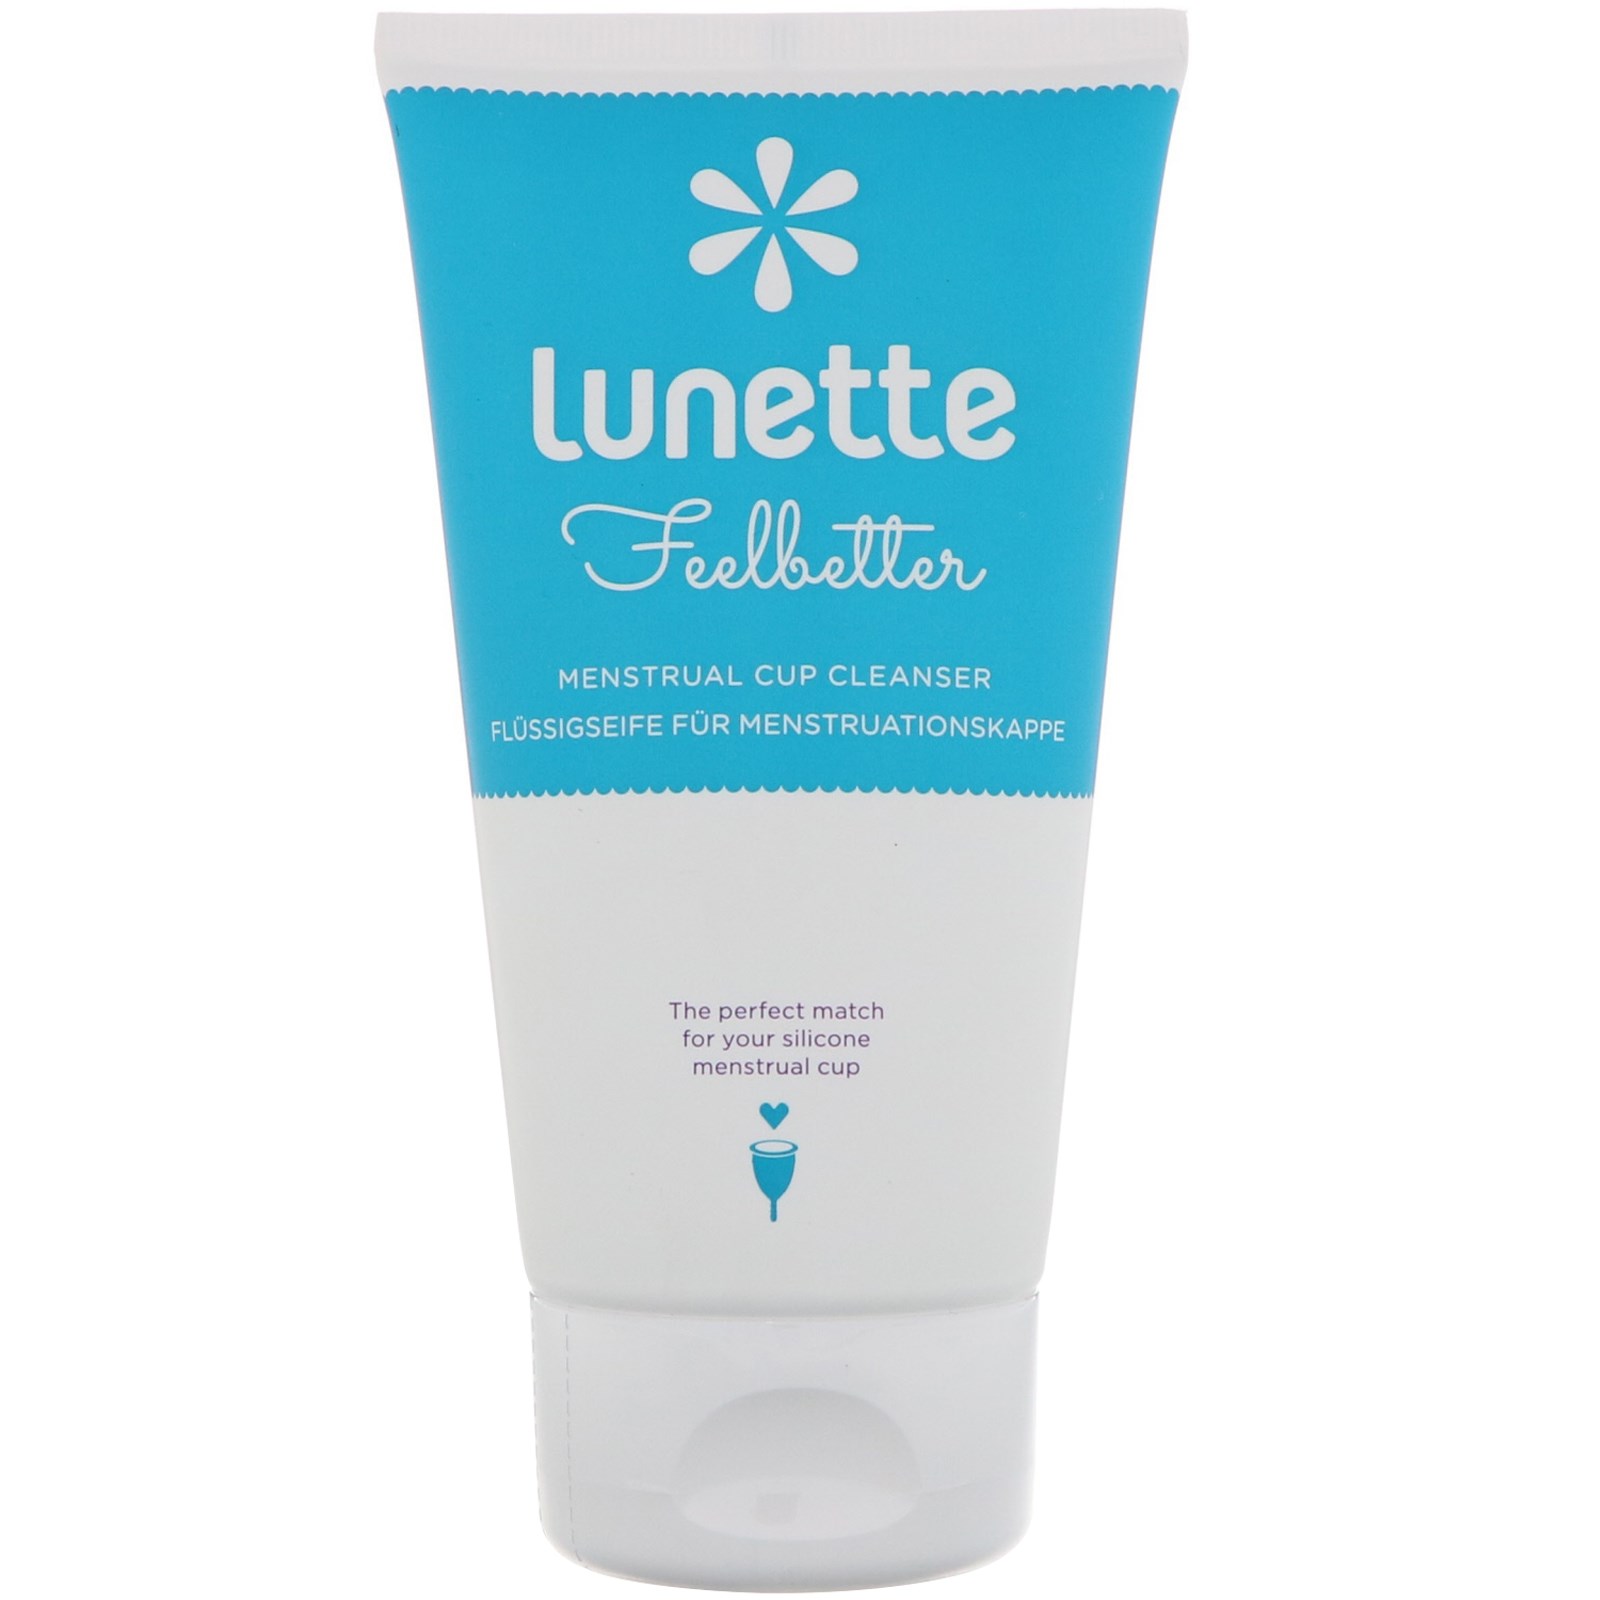 Lunette menstrual Cup. Cup Cleaner. Cup cleaning